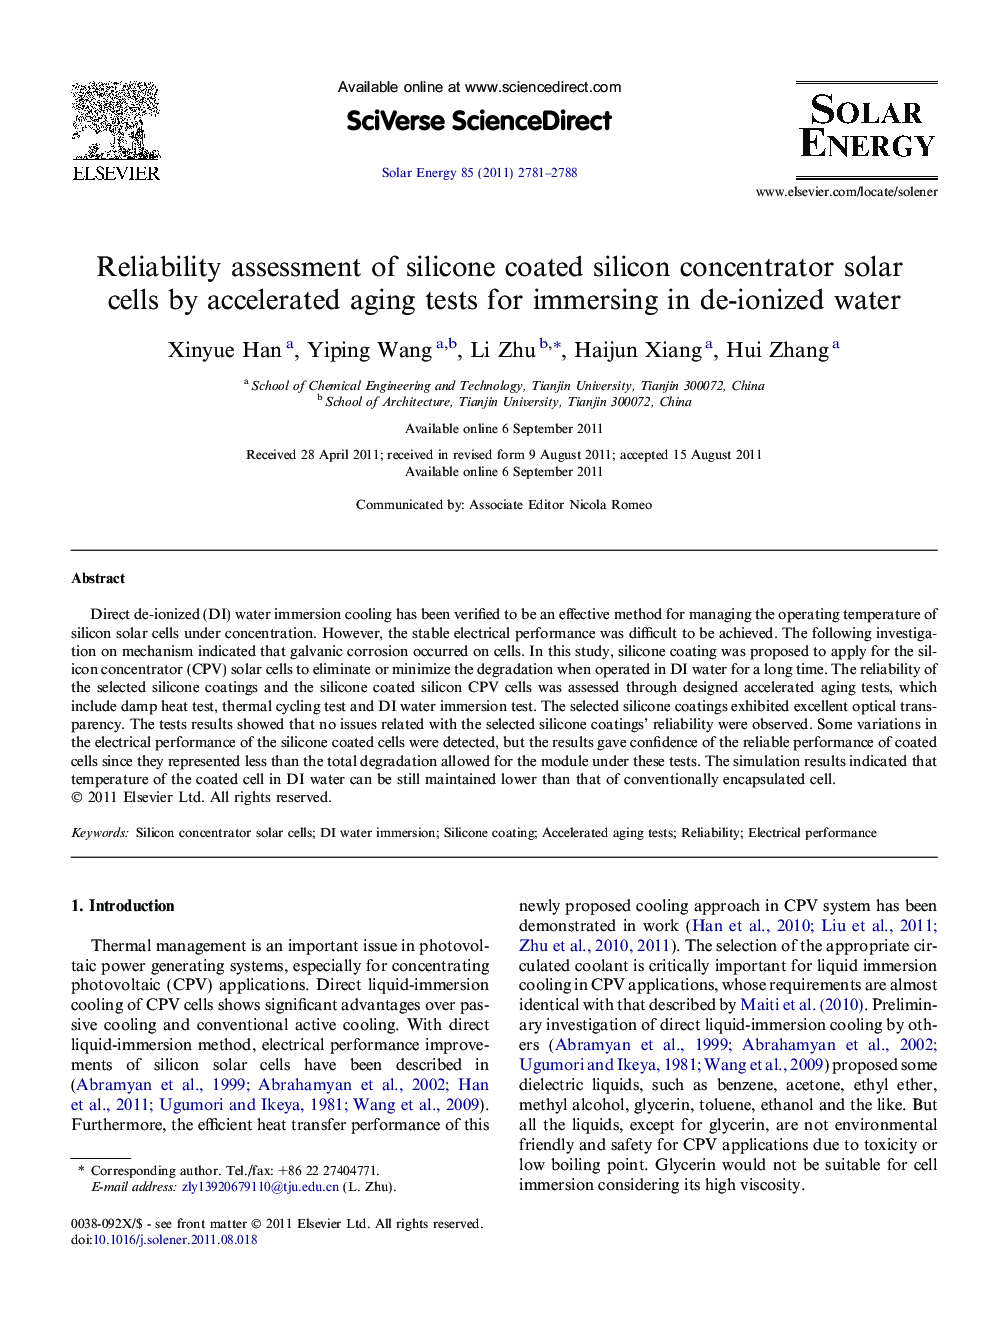 Reliability assessment of silicone coated silicon concentrator solar cells by accelerated aging tests for immersing in de-ionized water